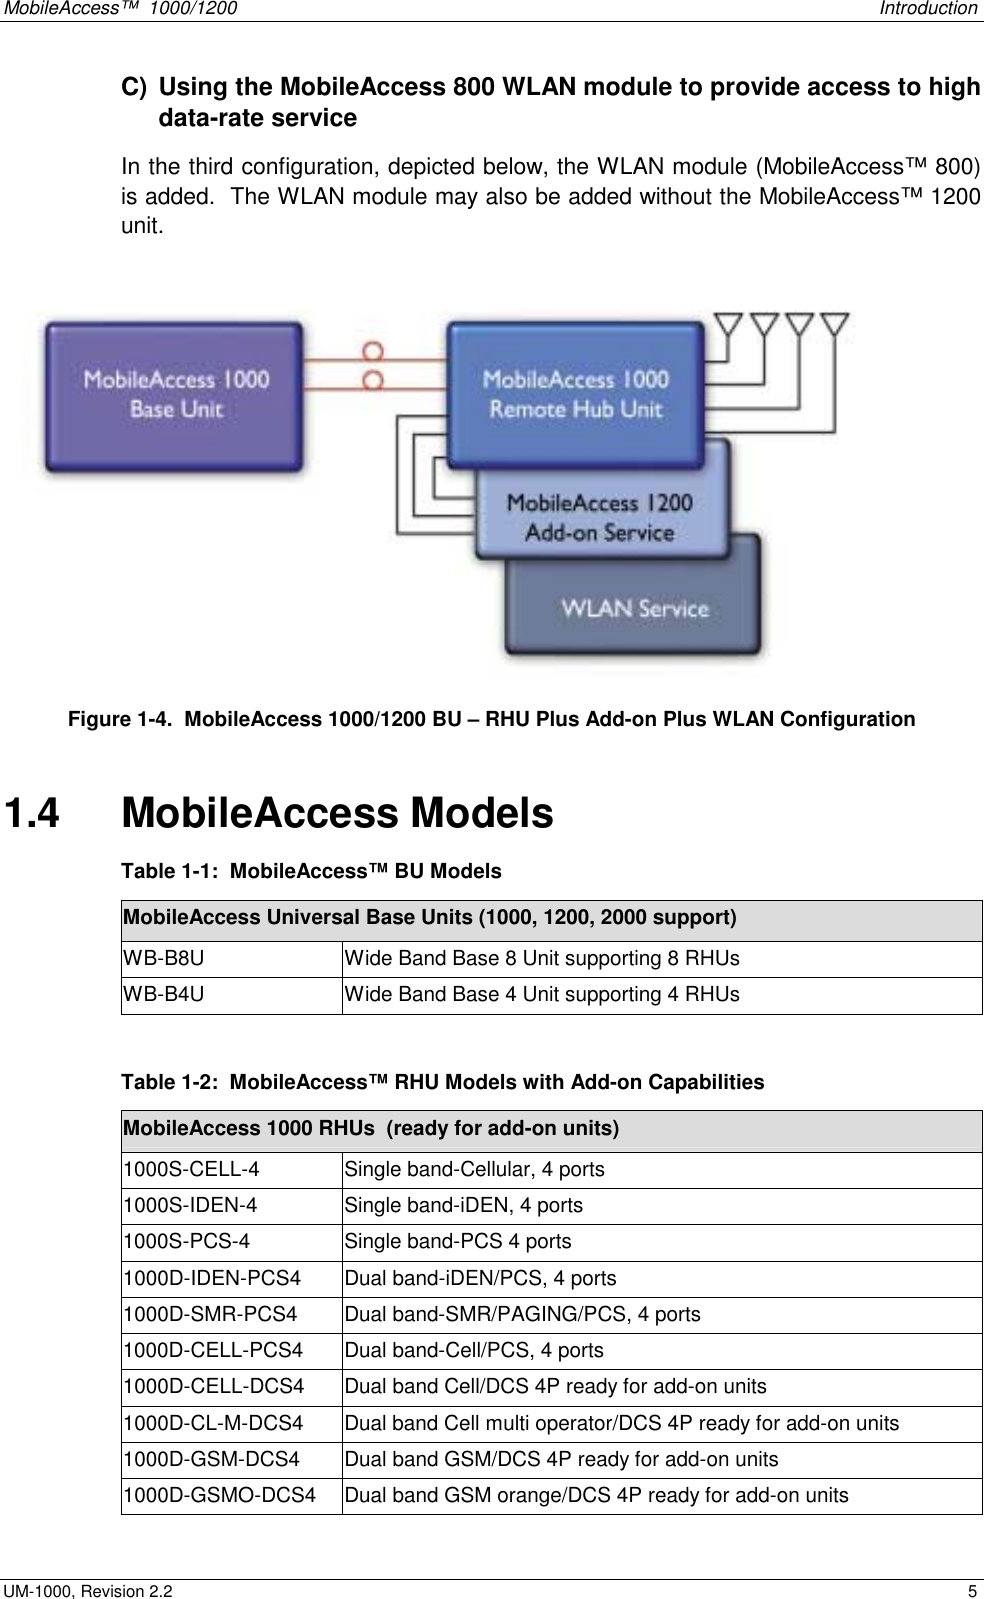 MobileAccess™  1000/1200    Introduction  UM-1000, Revision 2.2    5 C)  Using the MobileAccess 800 WLAN module to provide access to high data-rate service In the third configuration, depicted below, the WLAN module (MobileAccess™ 800) is added.  The WLAN module may also be added without the MobileAccess™ 1200 unit.   Figure  1-4.  MobileAccess 1000/1200 BU – RHU Plus Add-on Plus WLAN Configuration 1.4   MobileAccess Models Table  1-1:  MobileAccess™ BU Models MobileAccess Universal Base Units (1000, 1200, 2000 support) WB-B8U  Wide Band Base 8 Unit supporting 8 RHUs WB-B4U  Wide Band Base 4 Unit supporting 4 RHUs  Table  1-2:  MobileAccess™ RHU Models with Add-on Capabilities MobileAccess 1000 RHUs  (ready for add-on units) 1000S-CELL-4  Single band-Cellular, 4 ports 1000S-IDEN-4  Single band-iDEN, 4 ports 1000S-PCS-4  Single band-PCS 4 ports 1000D-IDEN-PCS4  Dual band-iDEN/PCS, 4 ports 1000D-SMR-PCS4  Dual band-SMR/PAGING/PCS, 4 ports 1000D-CELL-PCS4  Dual band-Cell/PCS, 4 ports 1000D-CELL-DCS4  Dual band Cell/DCS 4P ready for add-on units 1000D-CL-M-DCS4  Dual band Cell multi operator/DCS 4P ready for add-on units 1000D-GSM-DCS4  Dual band GSM/DCS 4P ready for add-on units 1000D-GSMO-DCS4  Dual band GSM orange/DCS 4P ready for add-on units 